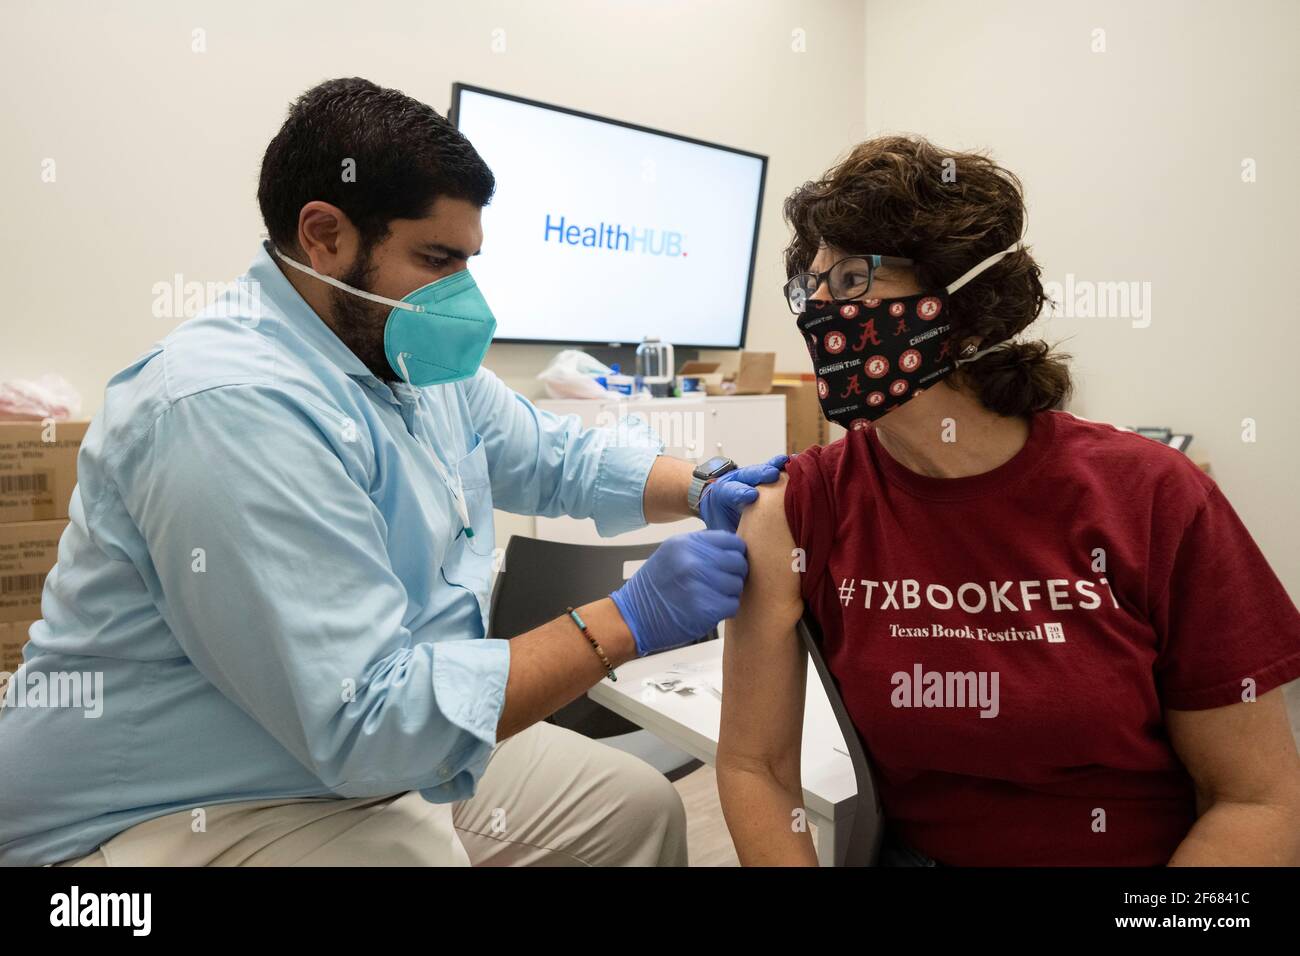 Austin, Texas March 30, 2021:  JANIS DAEMMRICH (r), 65, gets her second shot of Pfizer's COVID-19 vaccine at a local pharmacy, three weeks after the first in the same location. Texas is reporting larger shipments of vaccinations and 1 in 6 eligible Texans are fully vaccinated, around 16%. Stock Photo